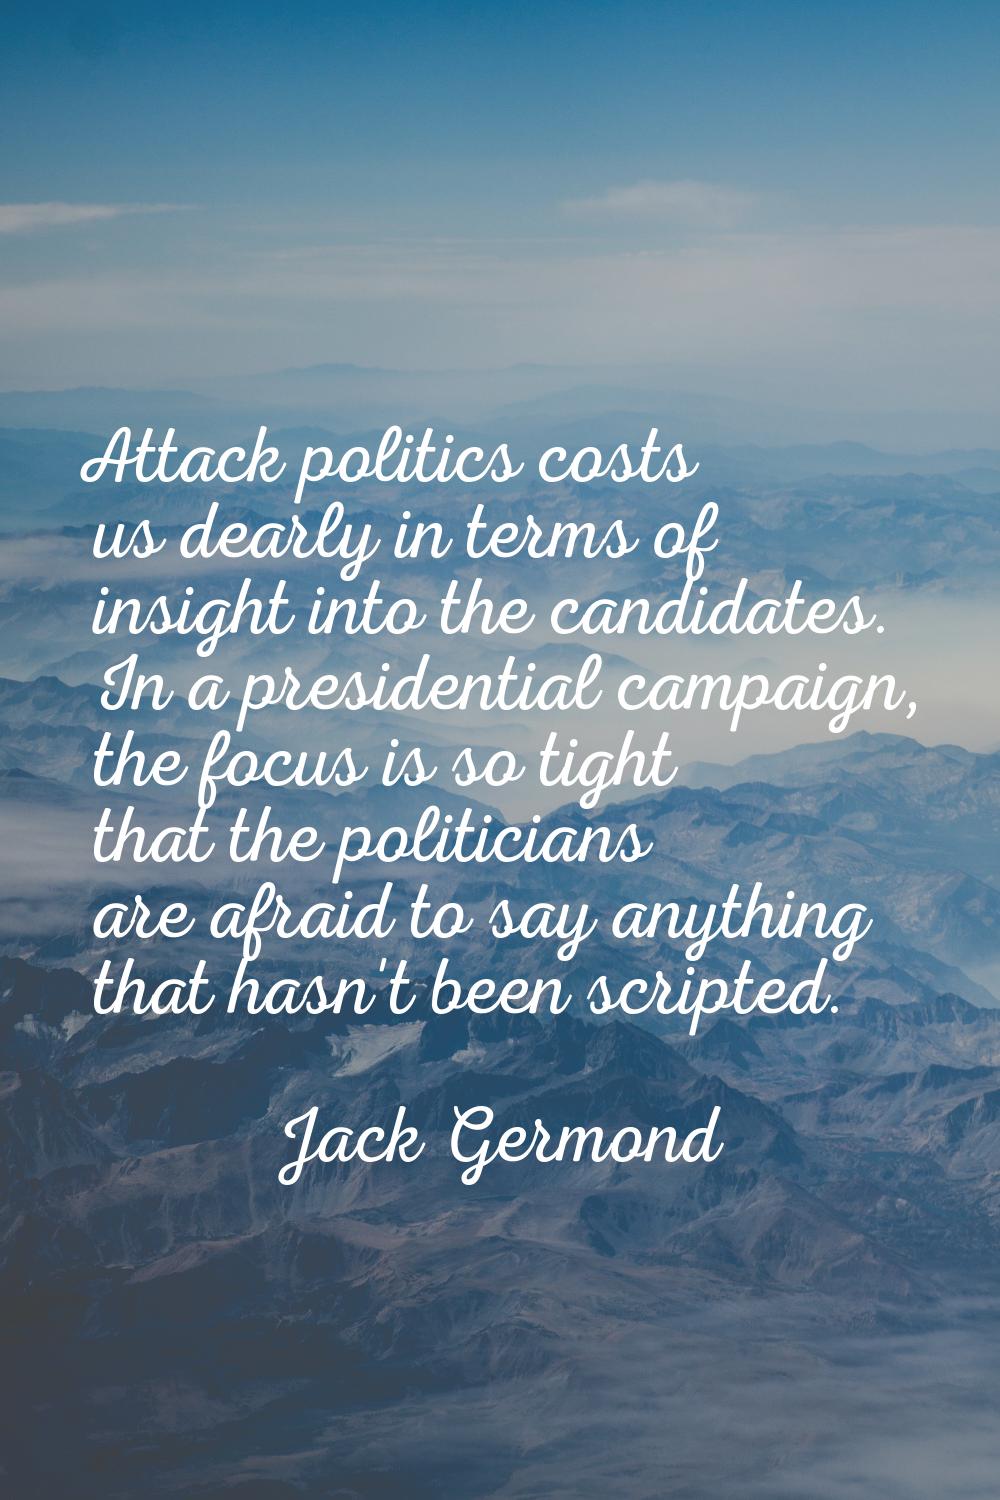 Attack politics costs us dearly in terms of insight into the candidates. In a presidential campaign